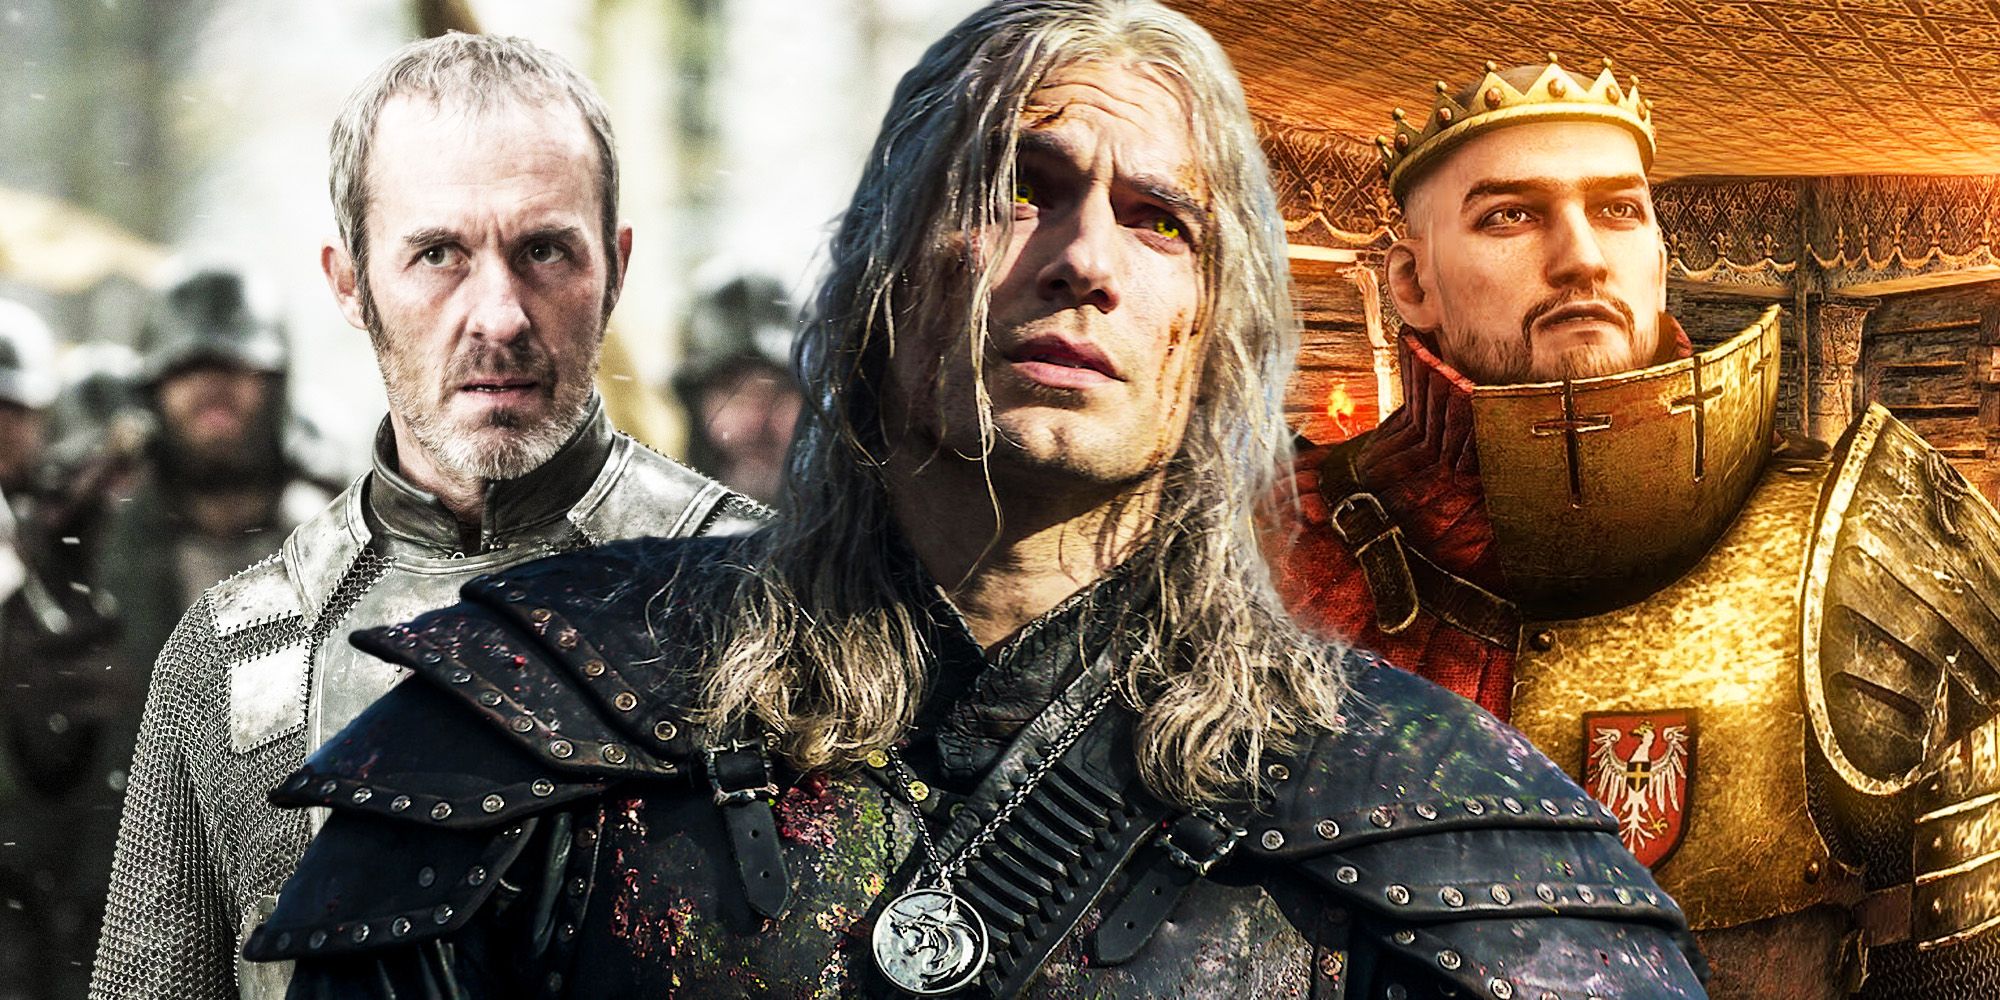 Surprise The Witcher S3 Casting Sets Up A Big Game Of Thrones Risk